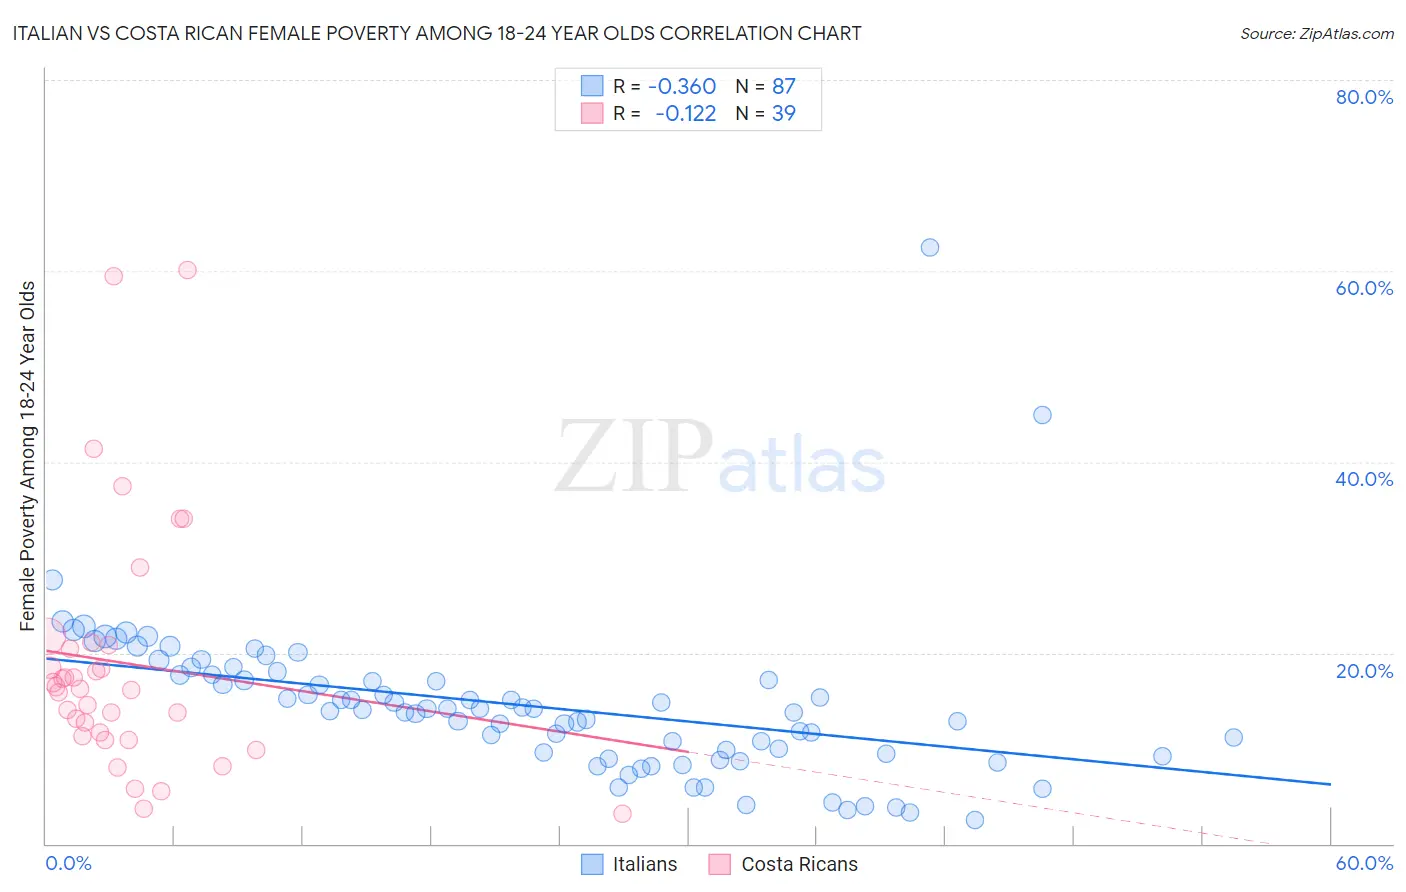 Italian vs Costa Rican Female Poverty Among 18-24 Year Olds